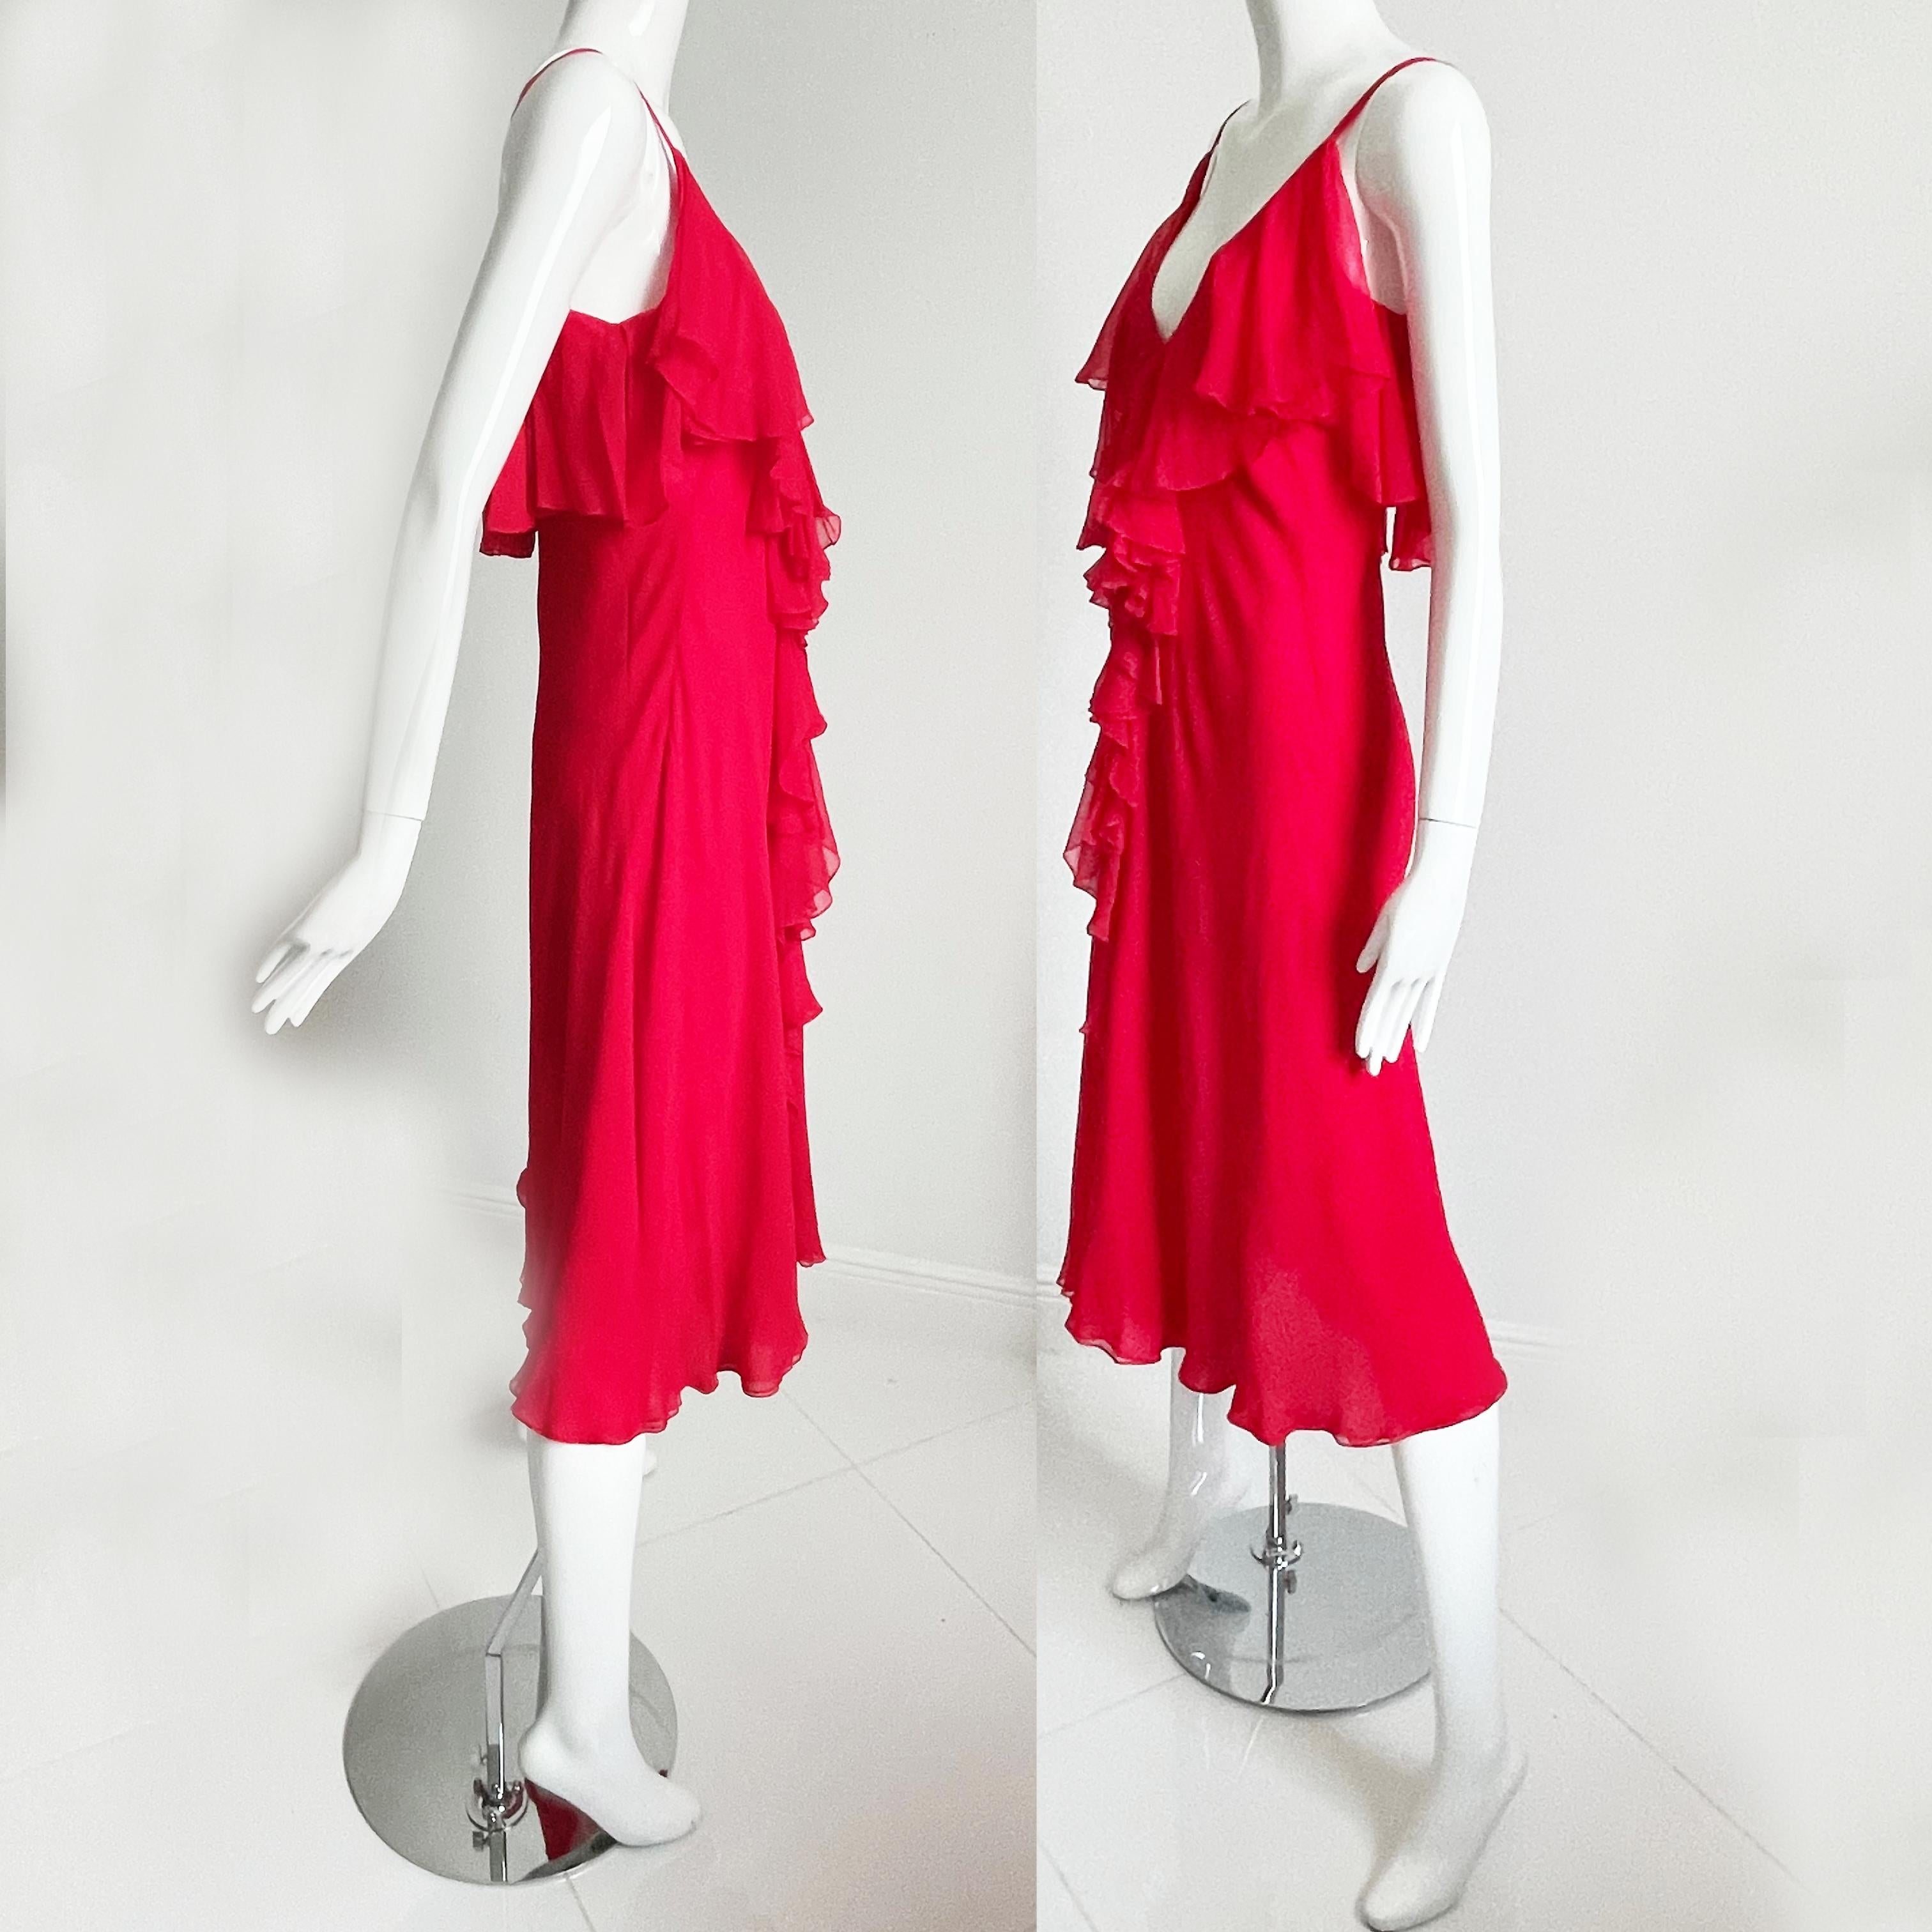 Pauline Trigere Dress and Shawl 2pc Set Red Silk Chiffon Loose Ruffles Vintage For Sale 7